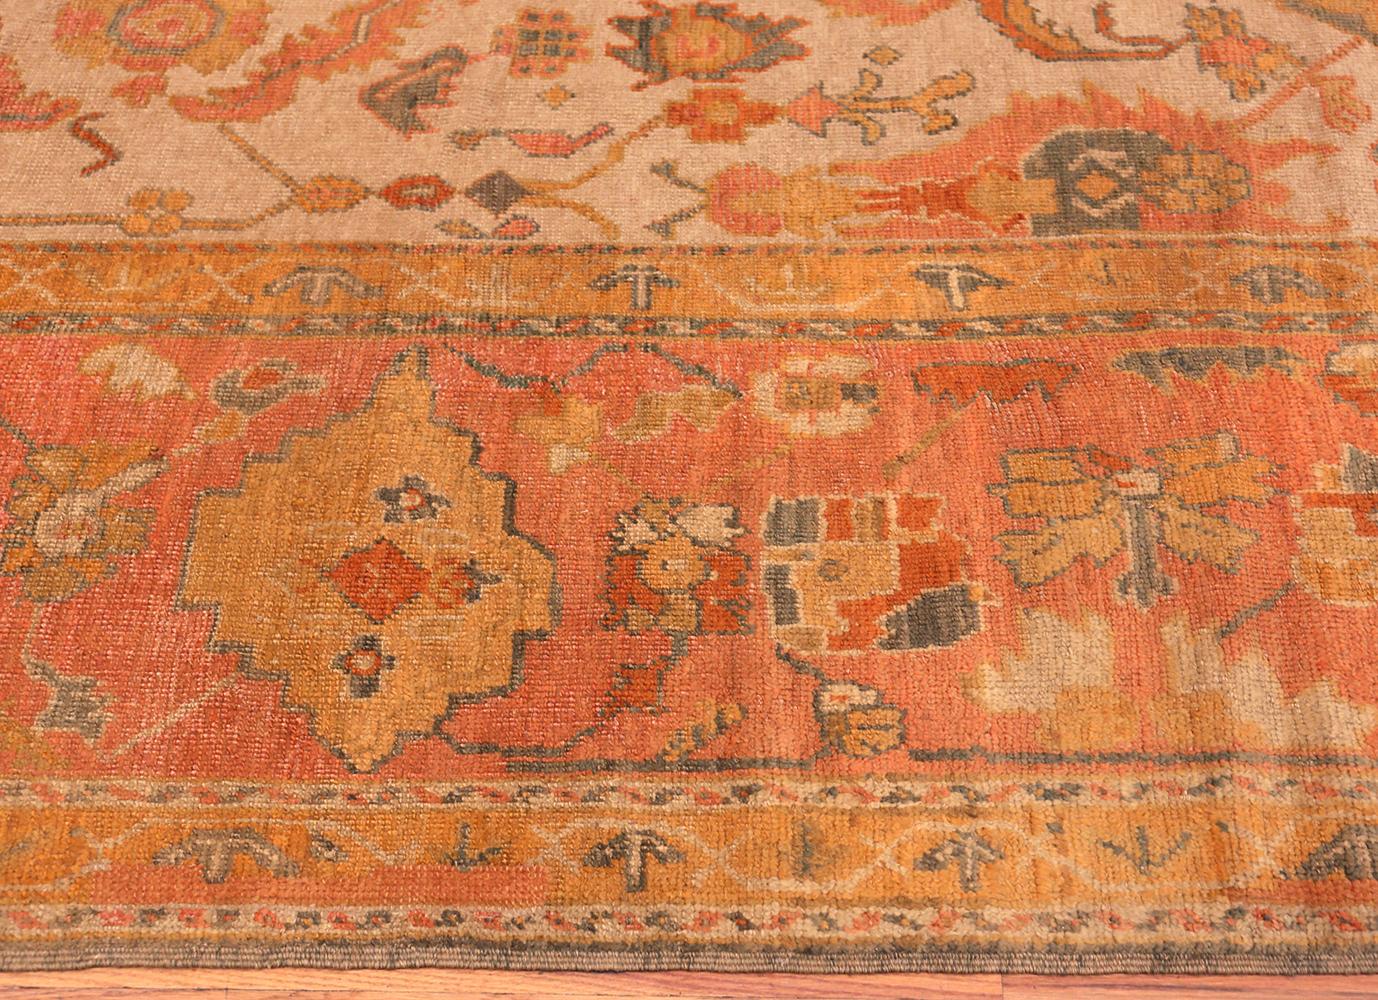 Beautiful large and extremely decorative antique Turkish Oushak rug, country of origin / rug type: Turkish rug, circa 1900. Size: 11 ft. 4 in x 15 ft. 5 in (3.45 m x 4.7 m).